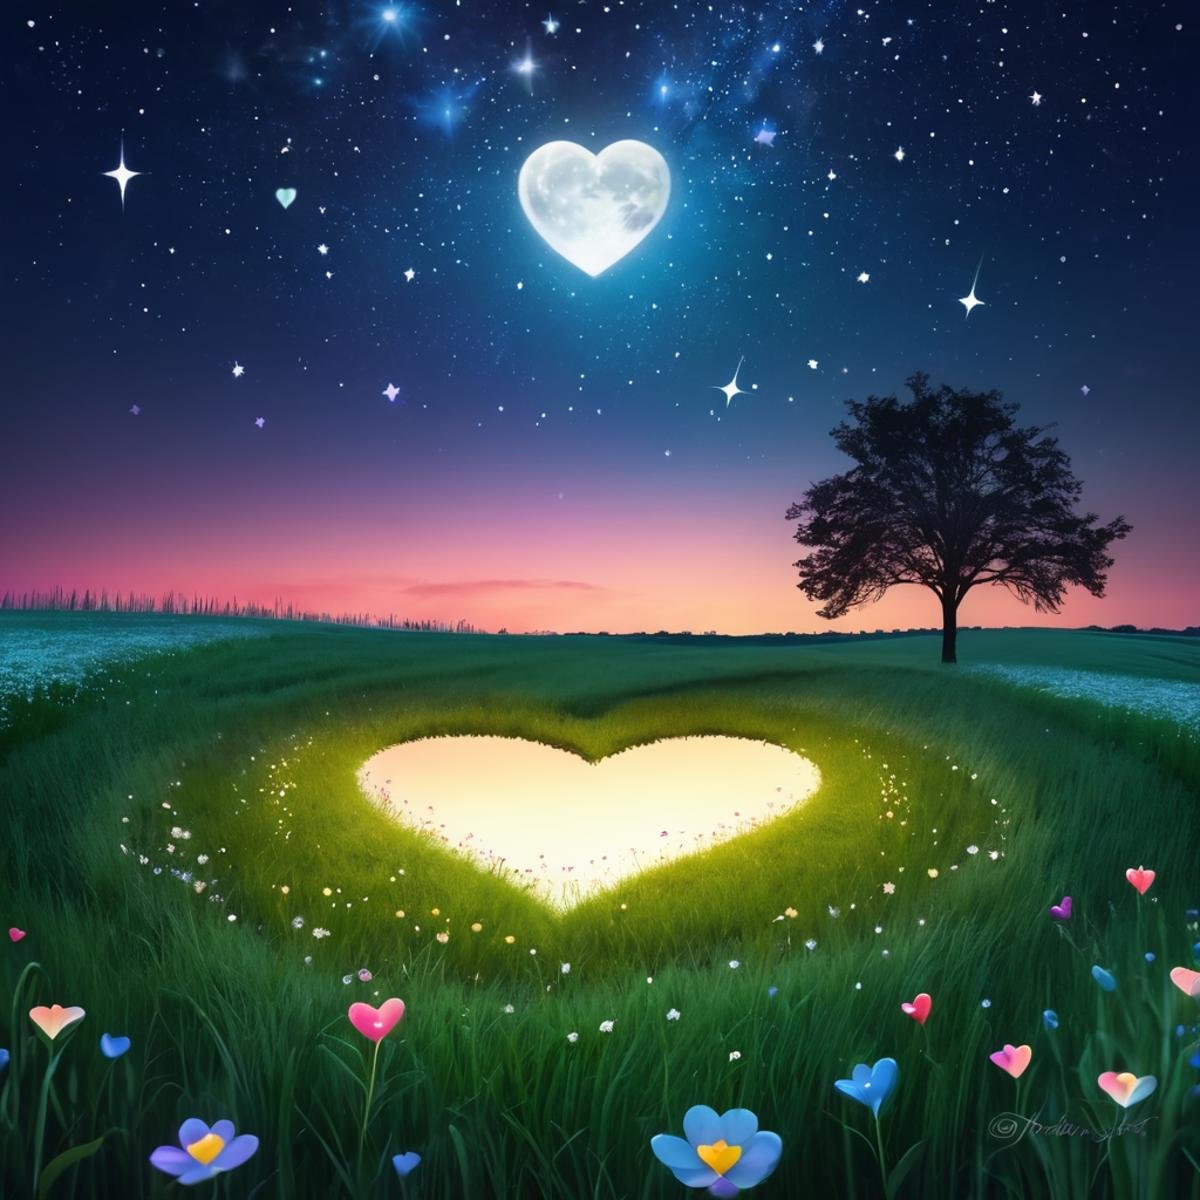 ValentineNatureStyle,flower,outdoors,sky,tree,no humans,night,grass,star (sky),heart shaped stars,heart shaped moon,nature,night sky,scenery,starry sky,field,colorful,heart shaped flower,valentine,  <lora:ValentineNatureStyle:1>, <lora:add_detail:0.8> <lora:more_details:0.8> <lora:colorfix:0.8>